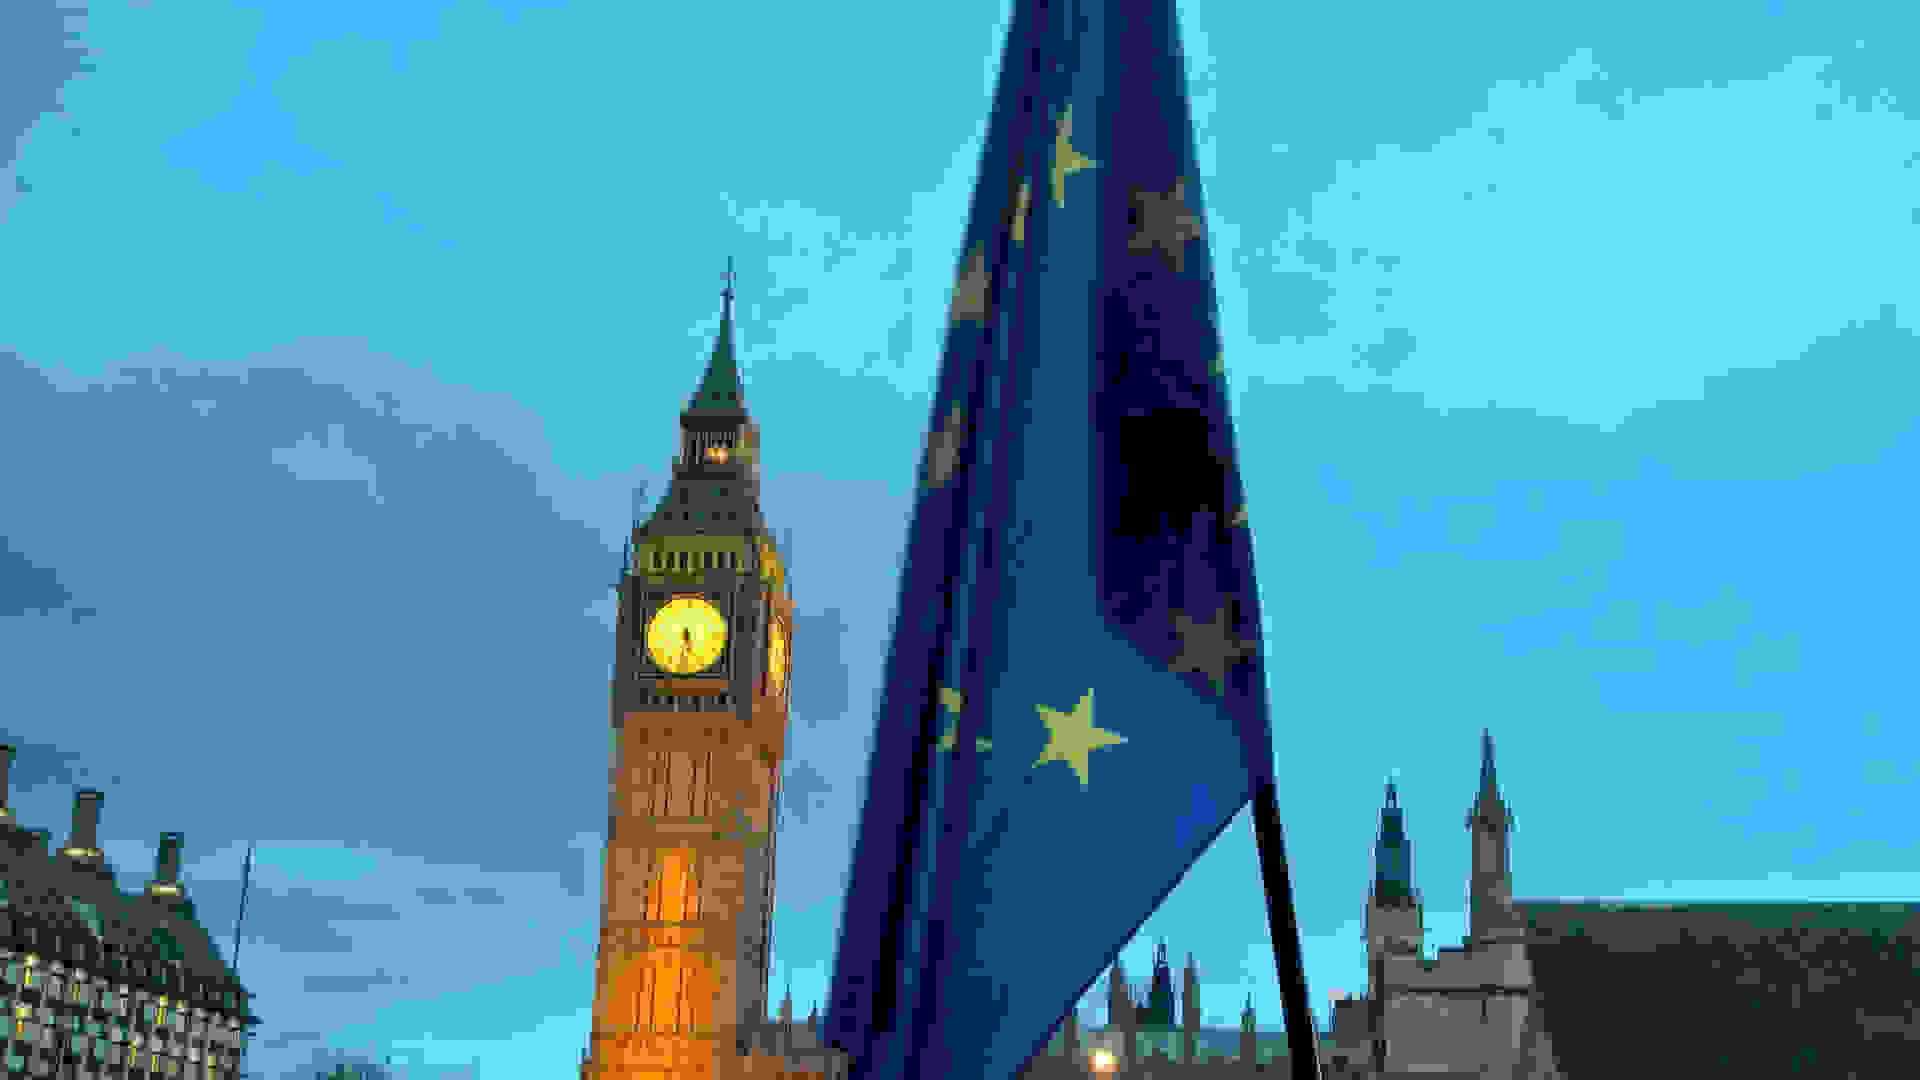 The EU flag in the foreground and Big Ben in the background during a protest in Parliament Square, Westinster